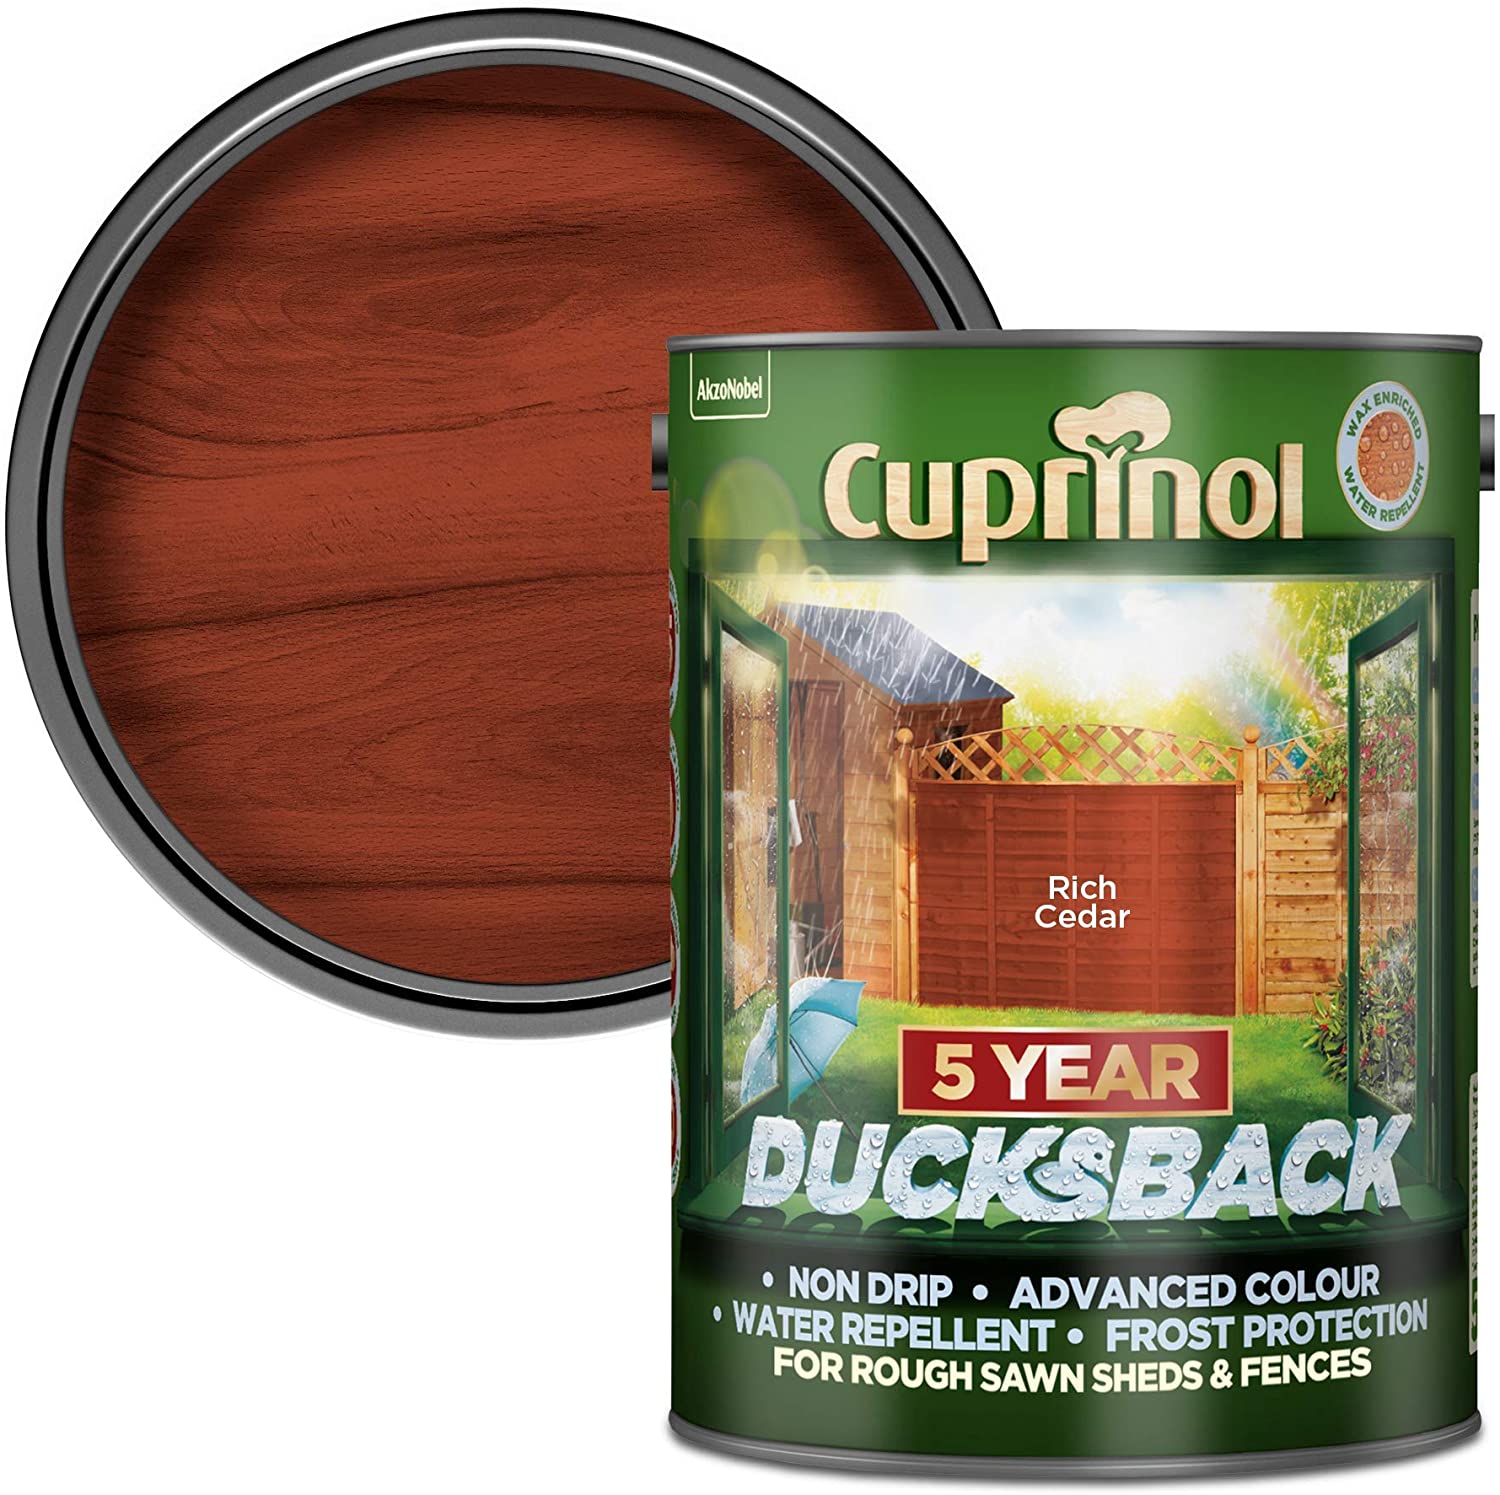 Cuprinol-Ducksback-5-Year-Waterproof-for-Sheds-and-Fences-Rich-Cedar-5-Litre